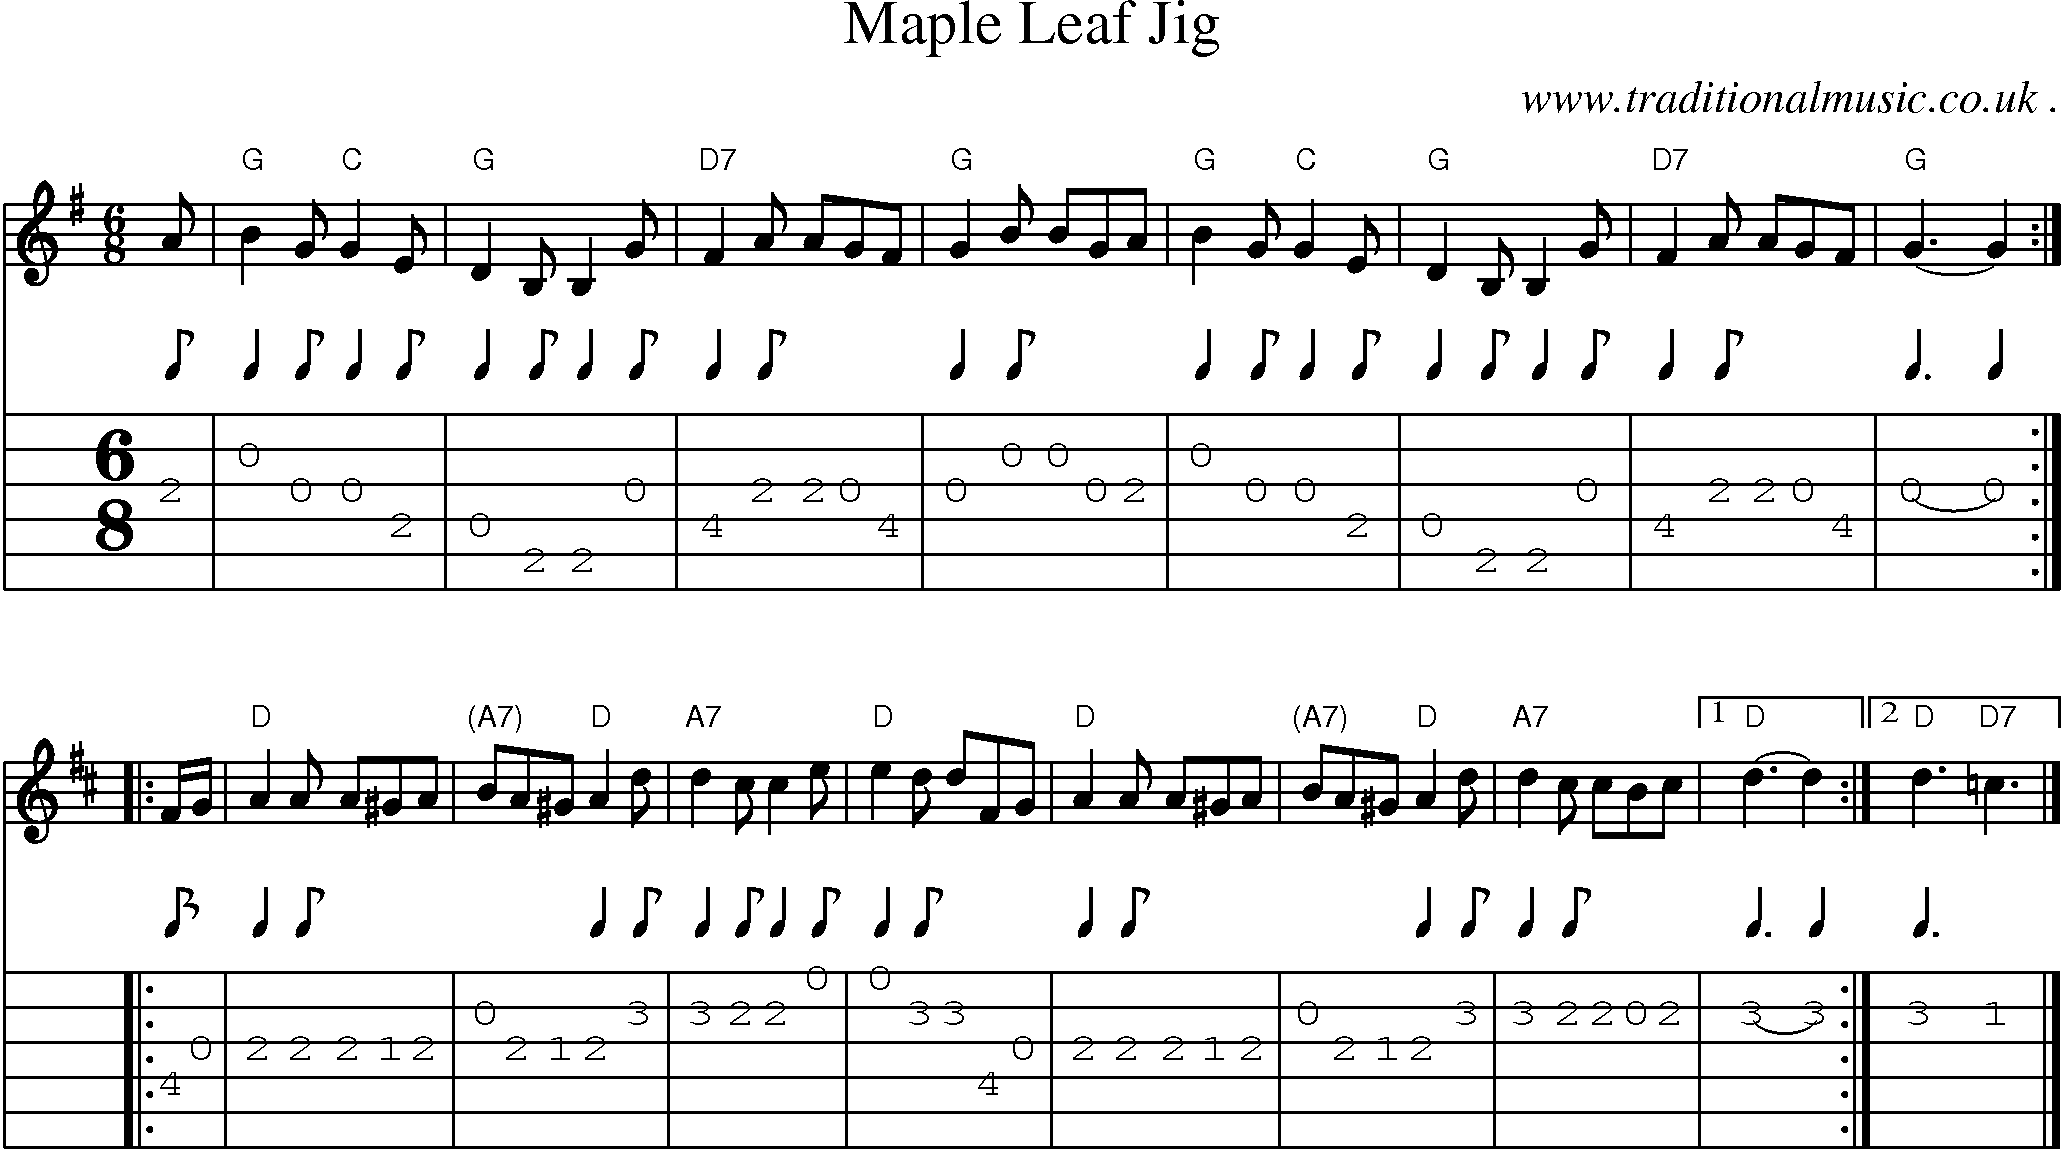 Sheet-music  score, Chords and Guitar Tabs for Maple Leaf Jig